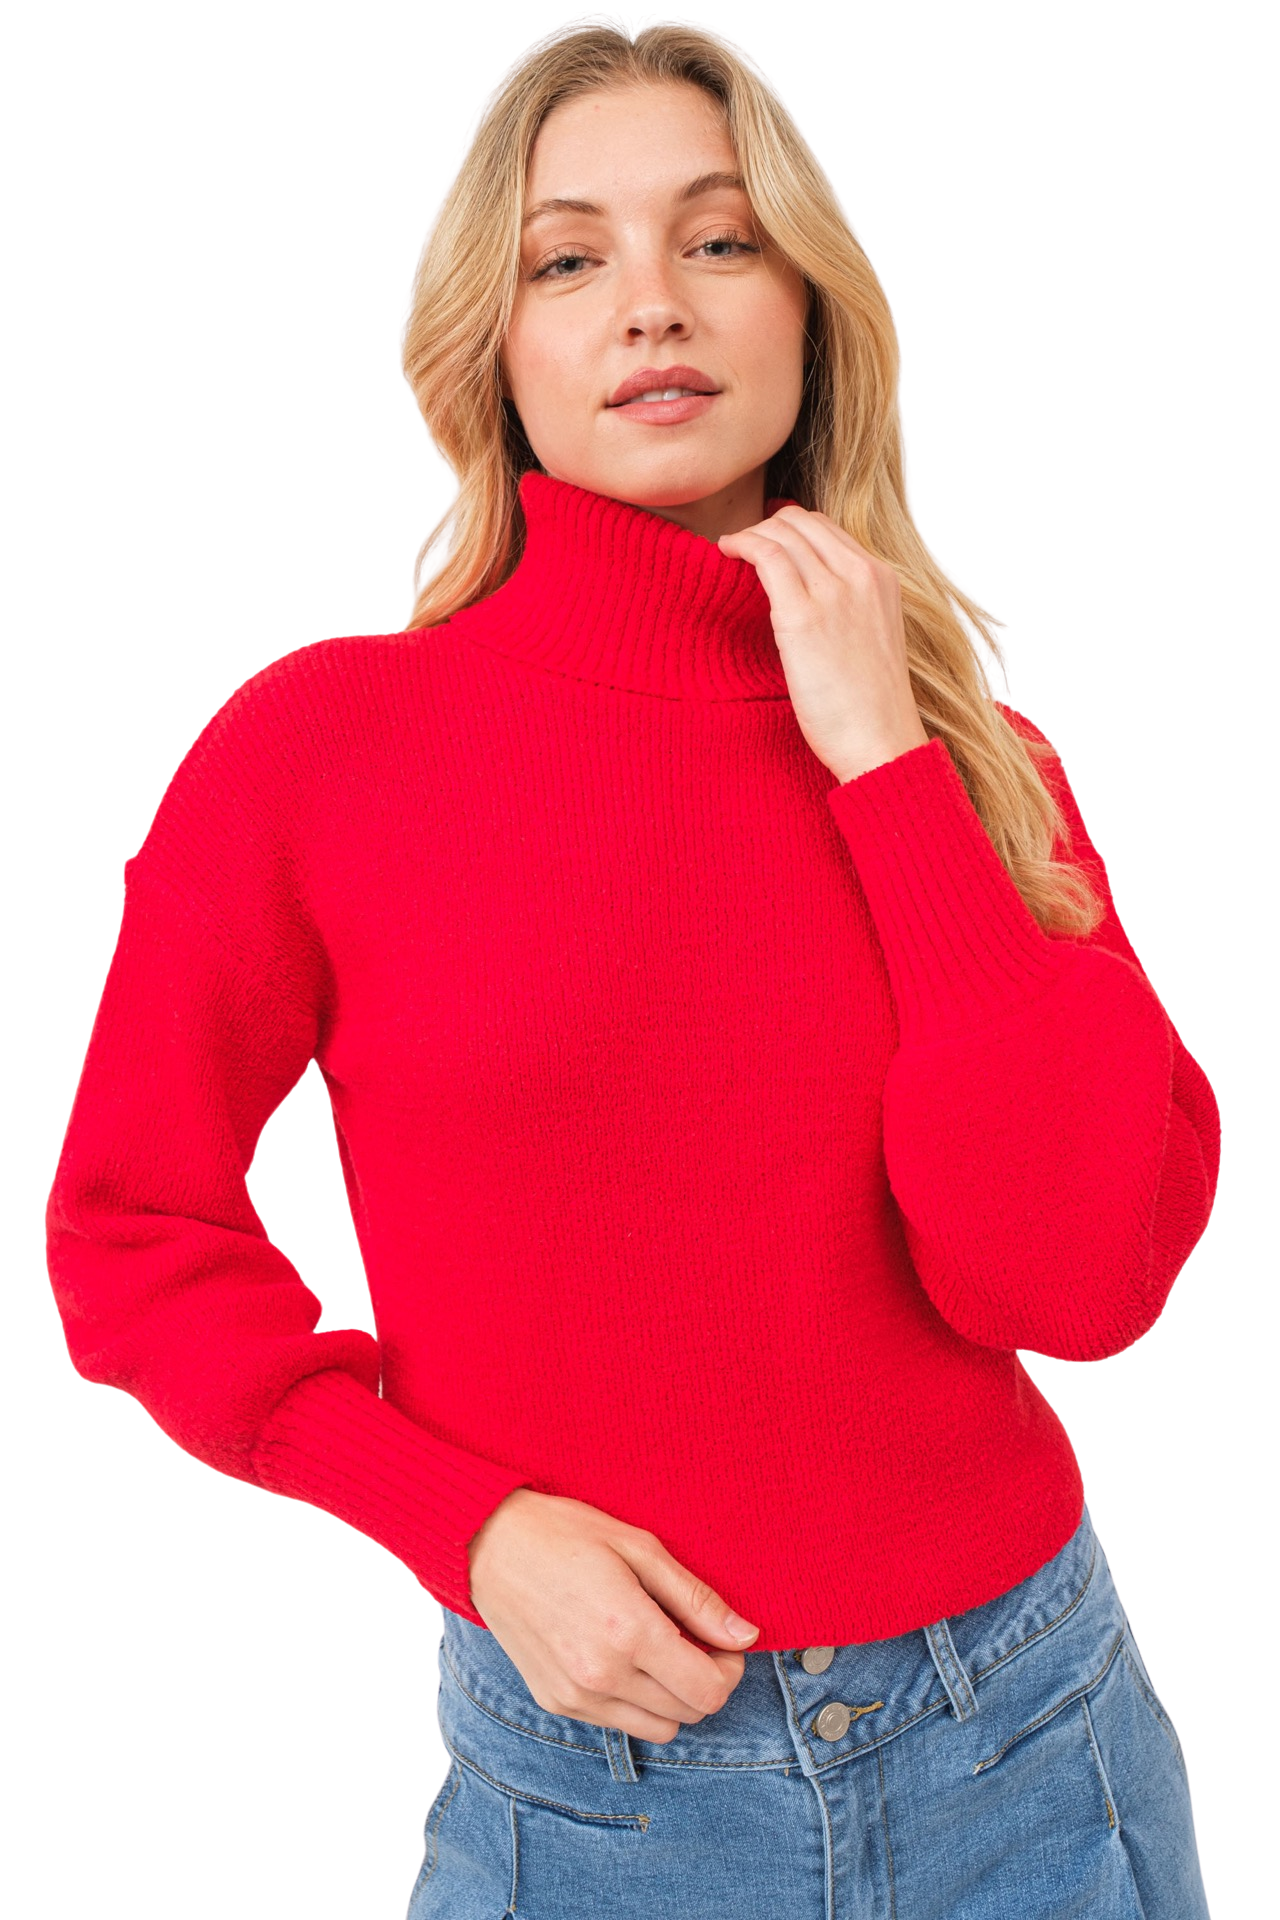 Apparel- Aaron and Amber Sweater Bianca Sweater